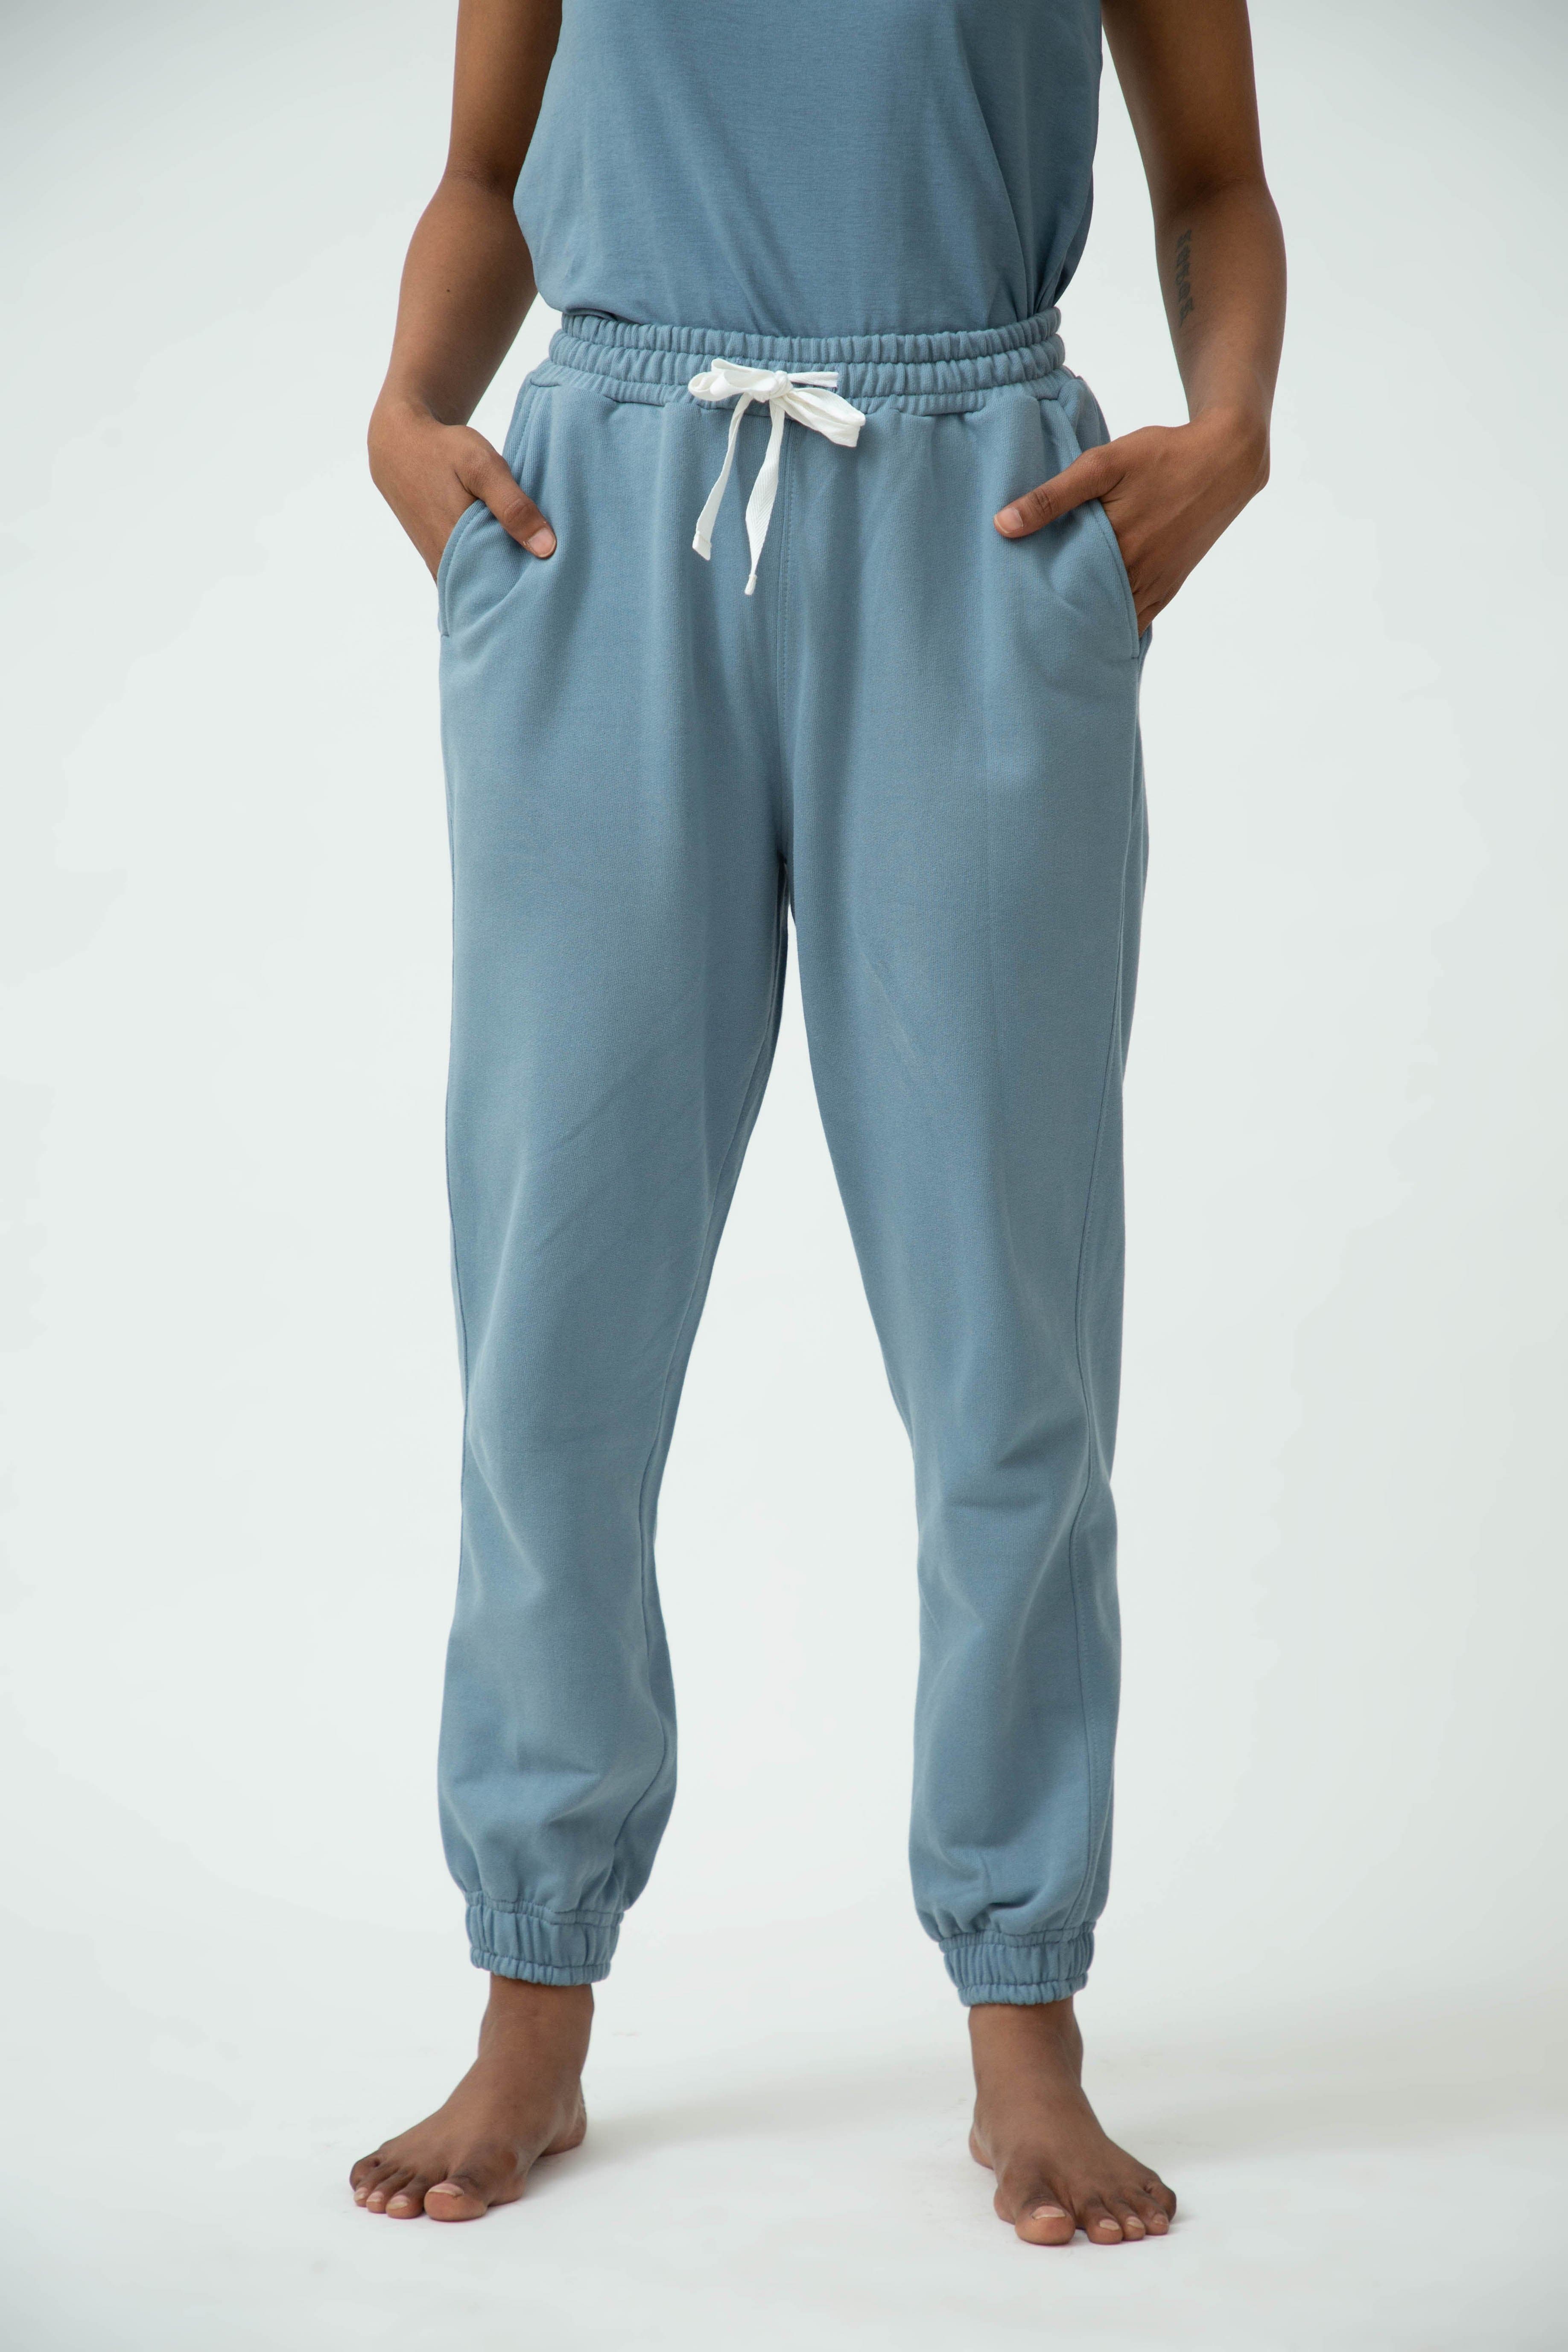 Saltpetre womens wear, lounge wear for casual wear. Comfortable joggers with elasticated ankle and side pockets in pale blue colour. Made from 100% organic cotton.